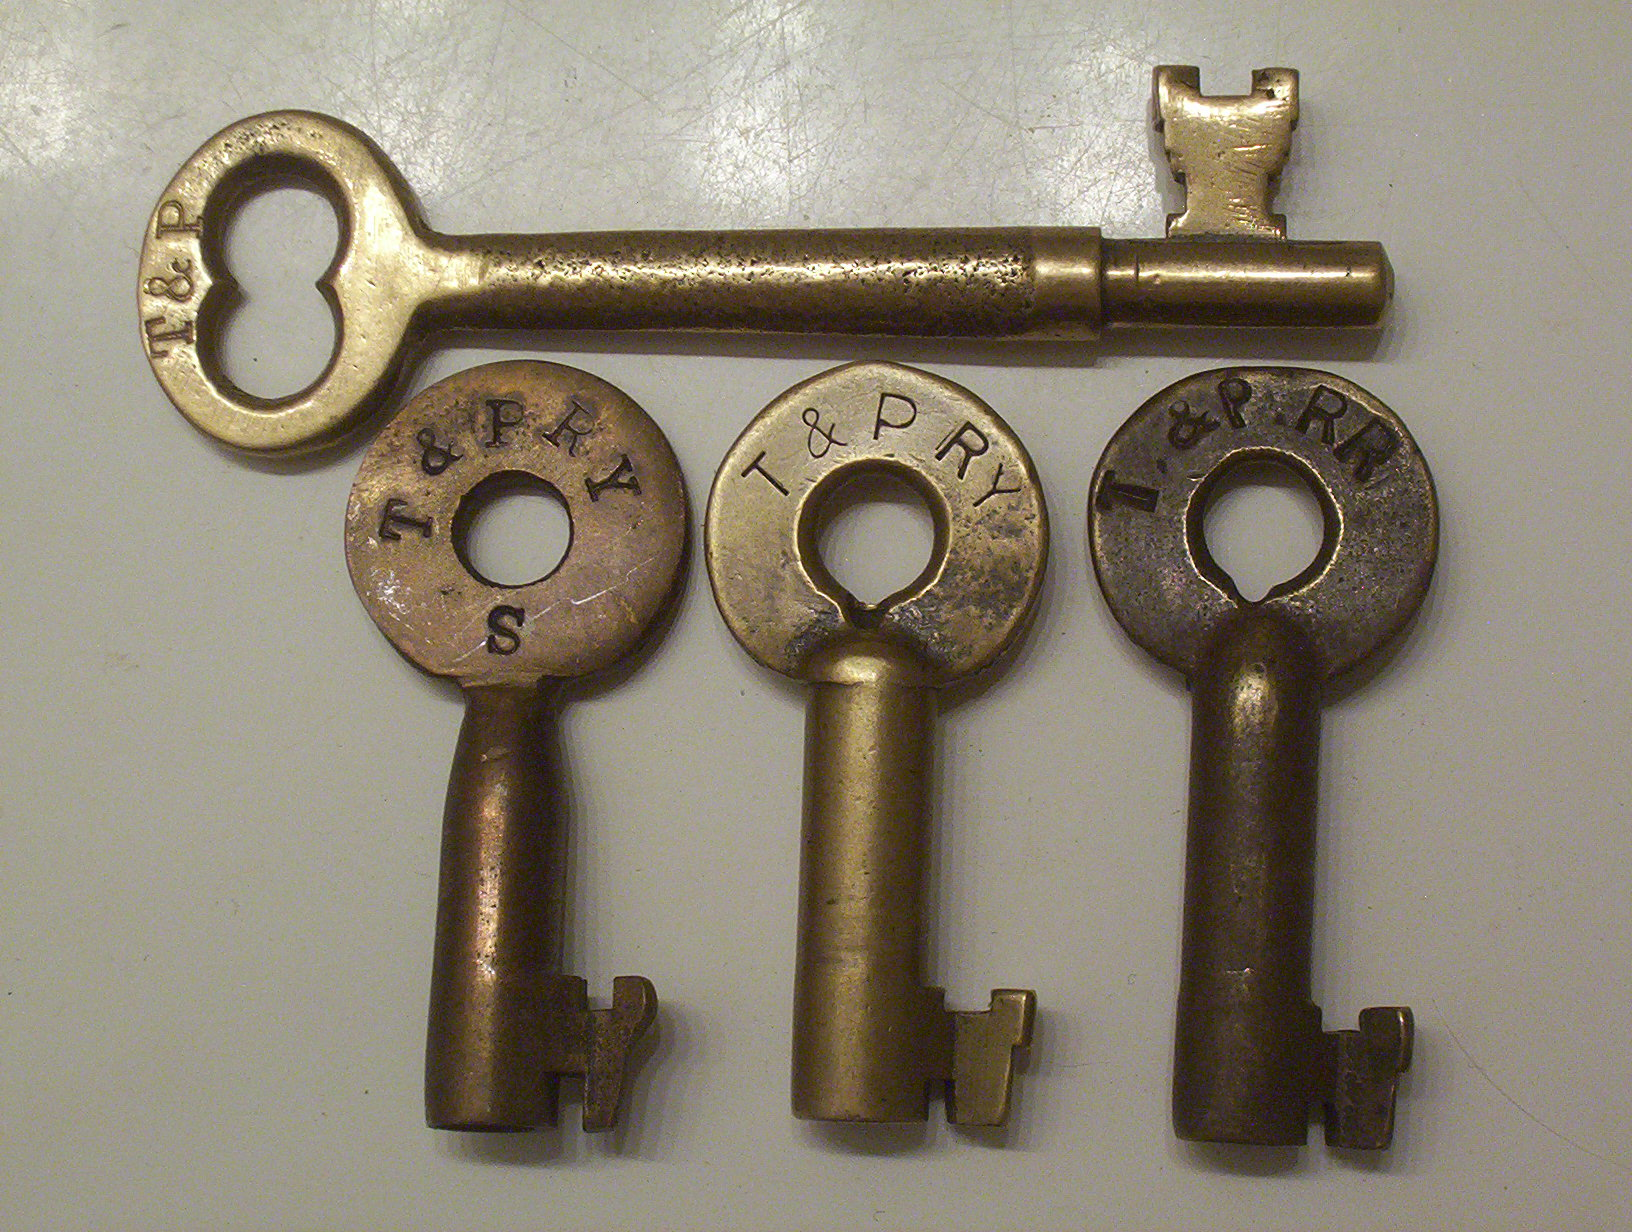 Image of T&P  Miscellany - T&P Caboose and Switch Keys